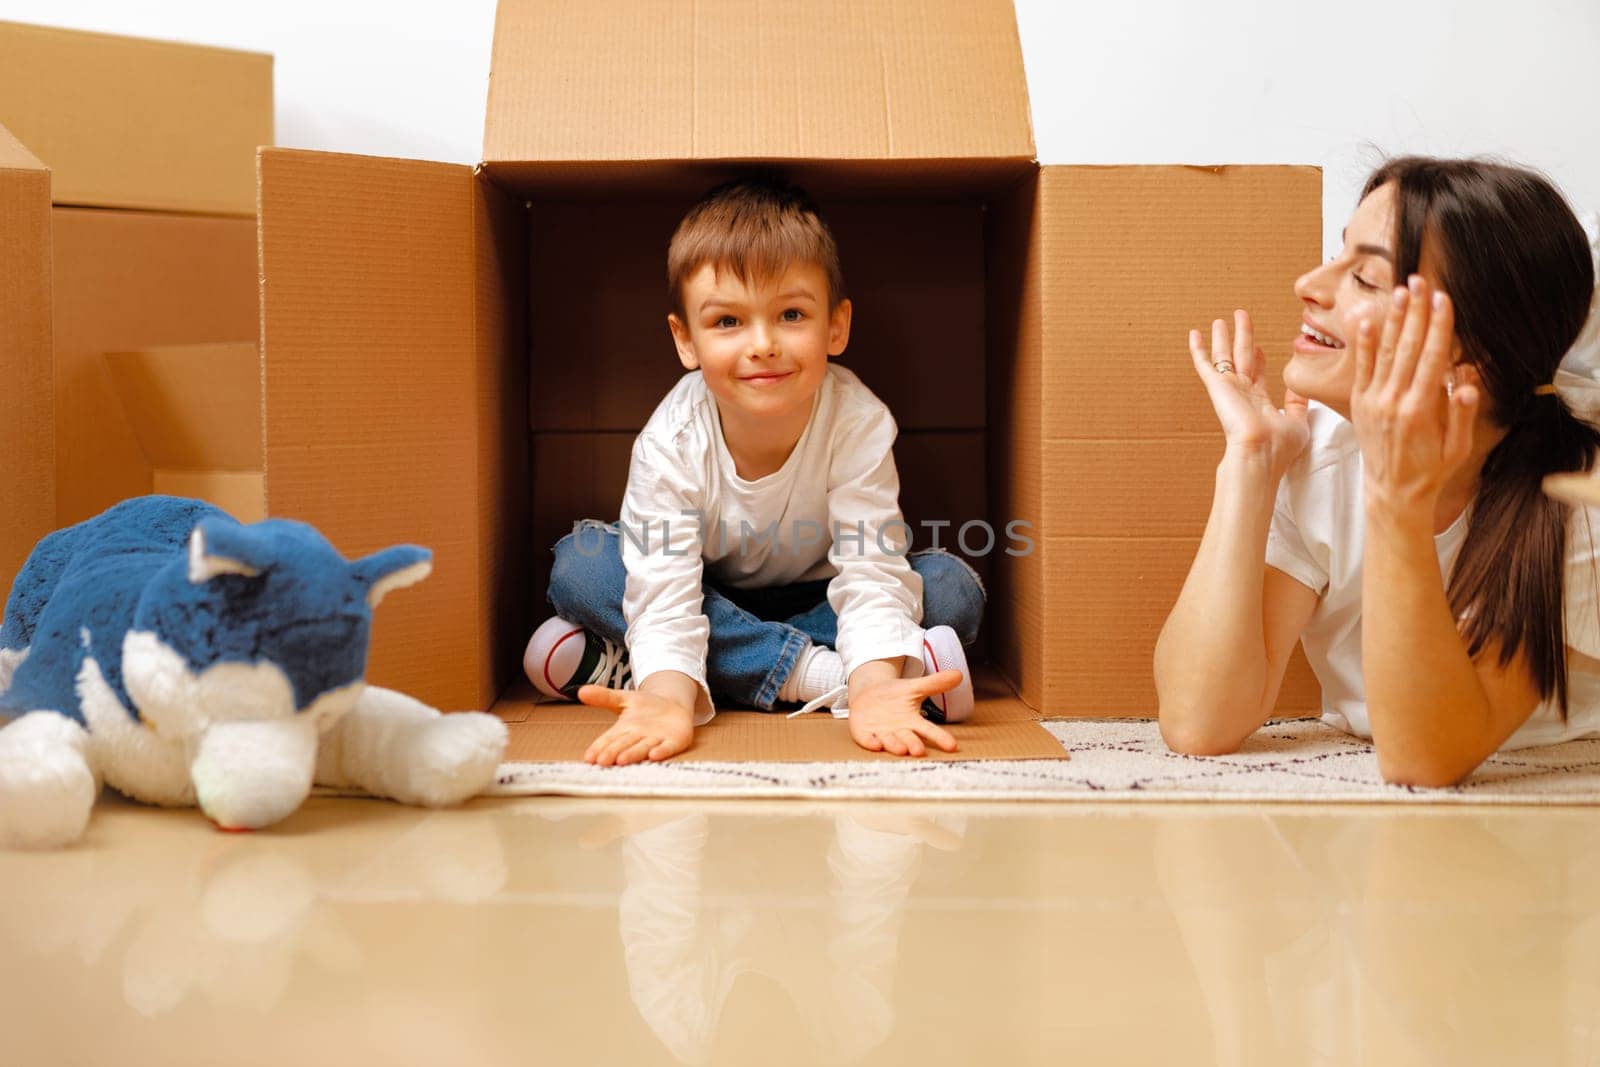 Beautiful smiling woman and little boy with cardboard boxes moving to new home by Fabrikasimf